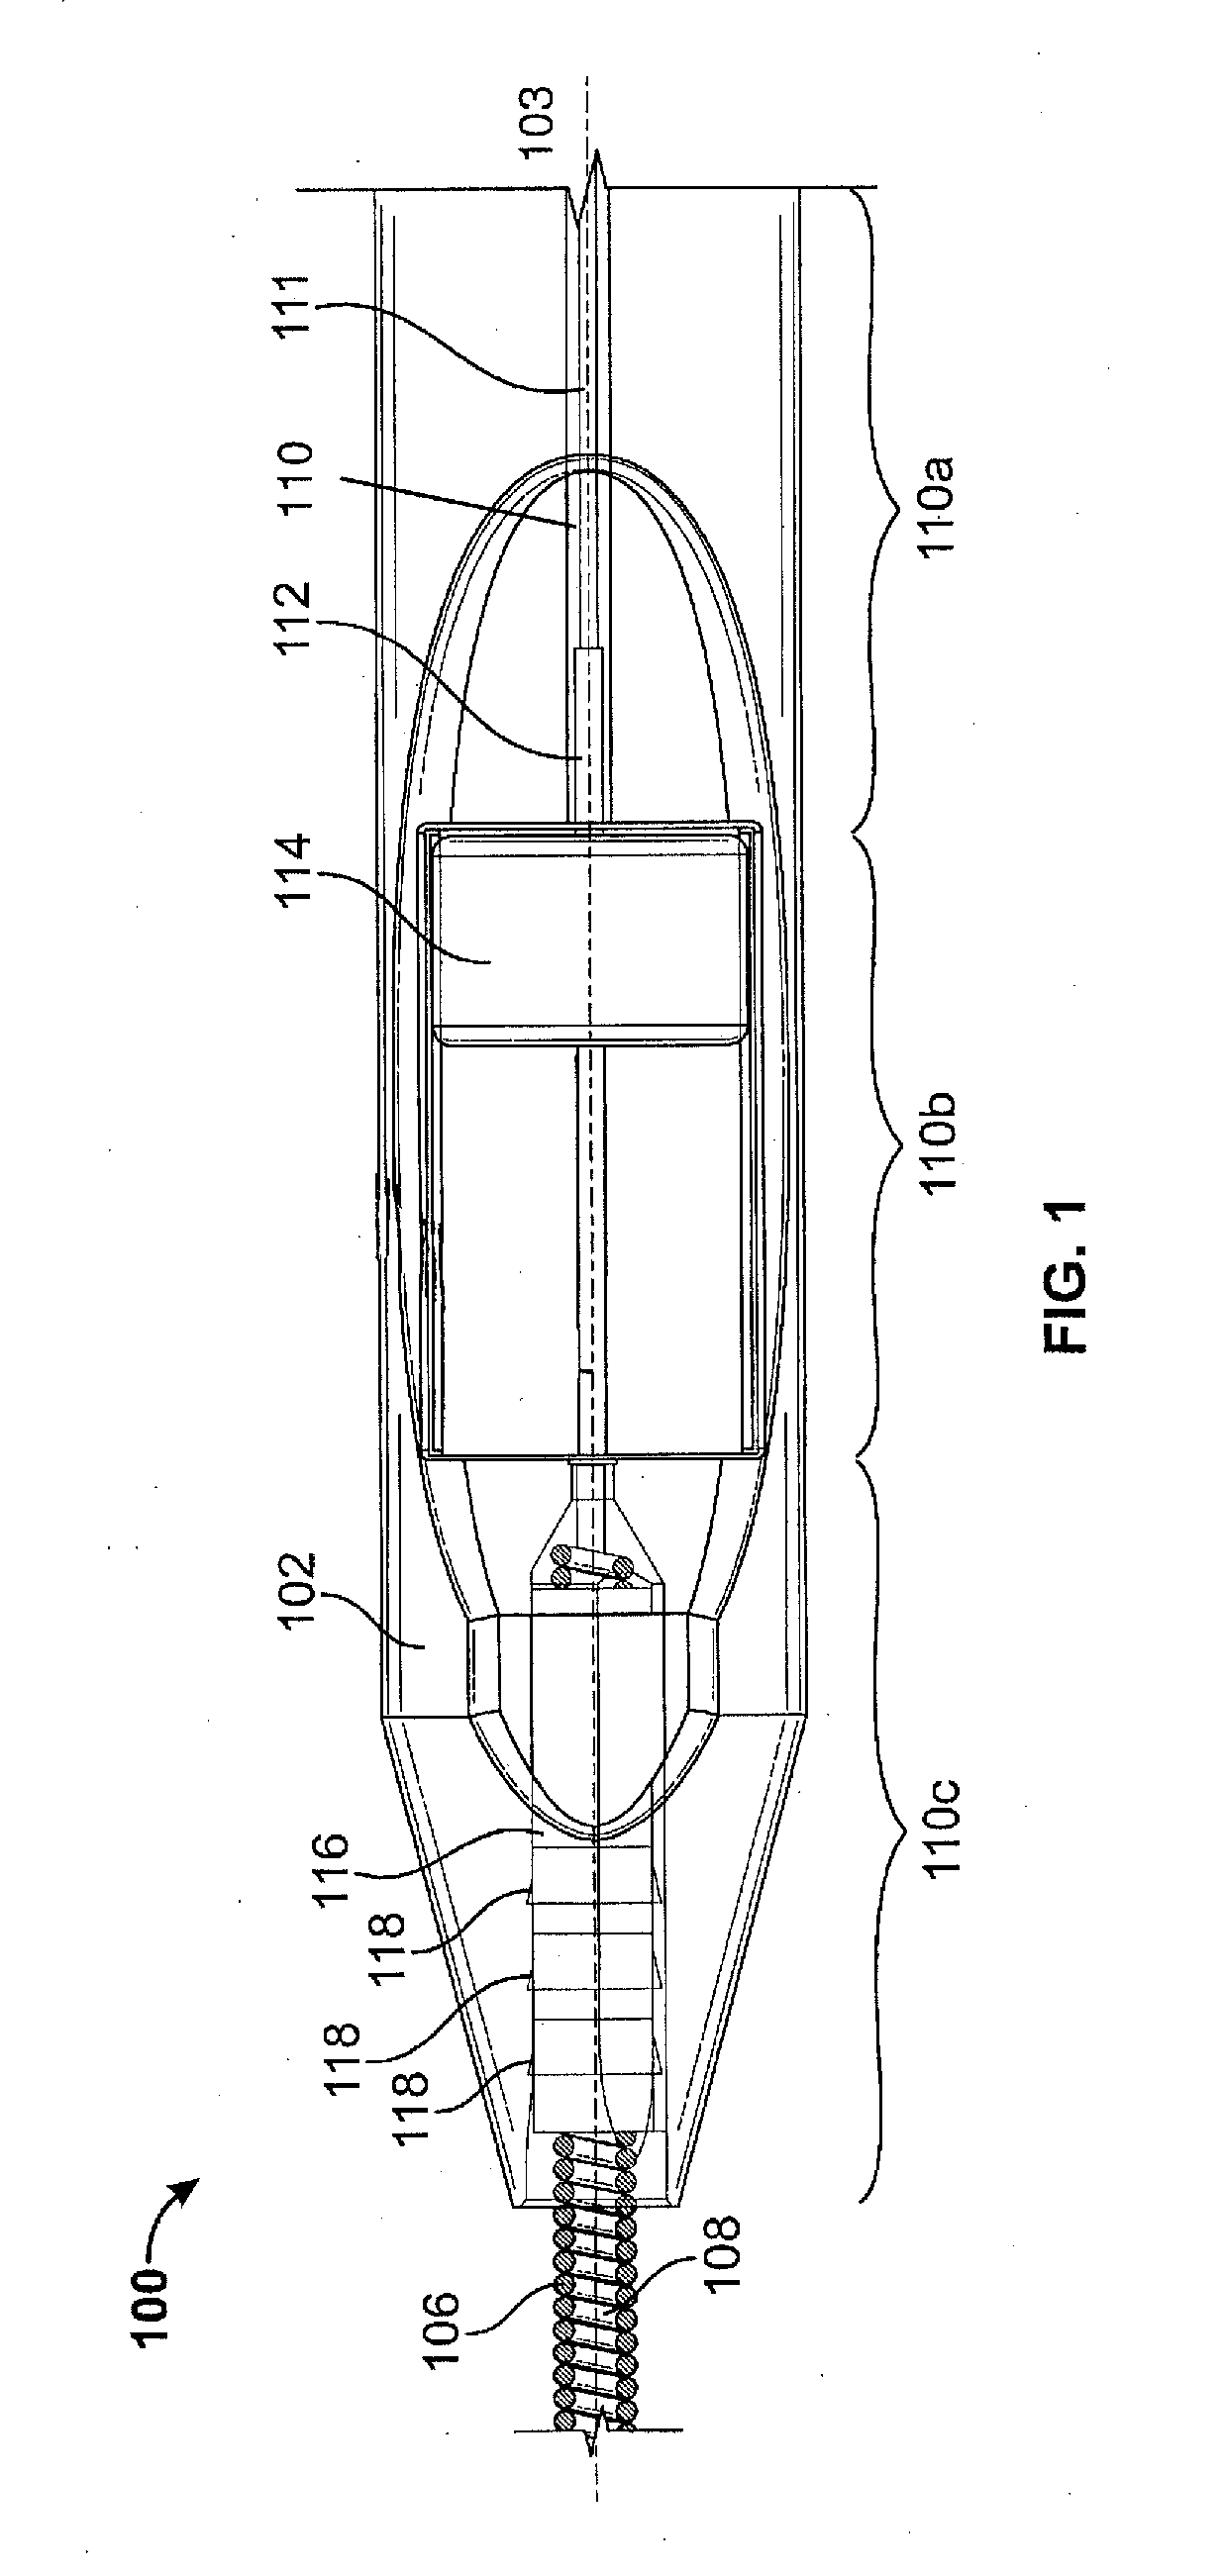 Linear rotation mechanism for hemostasis clip device and other devices